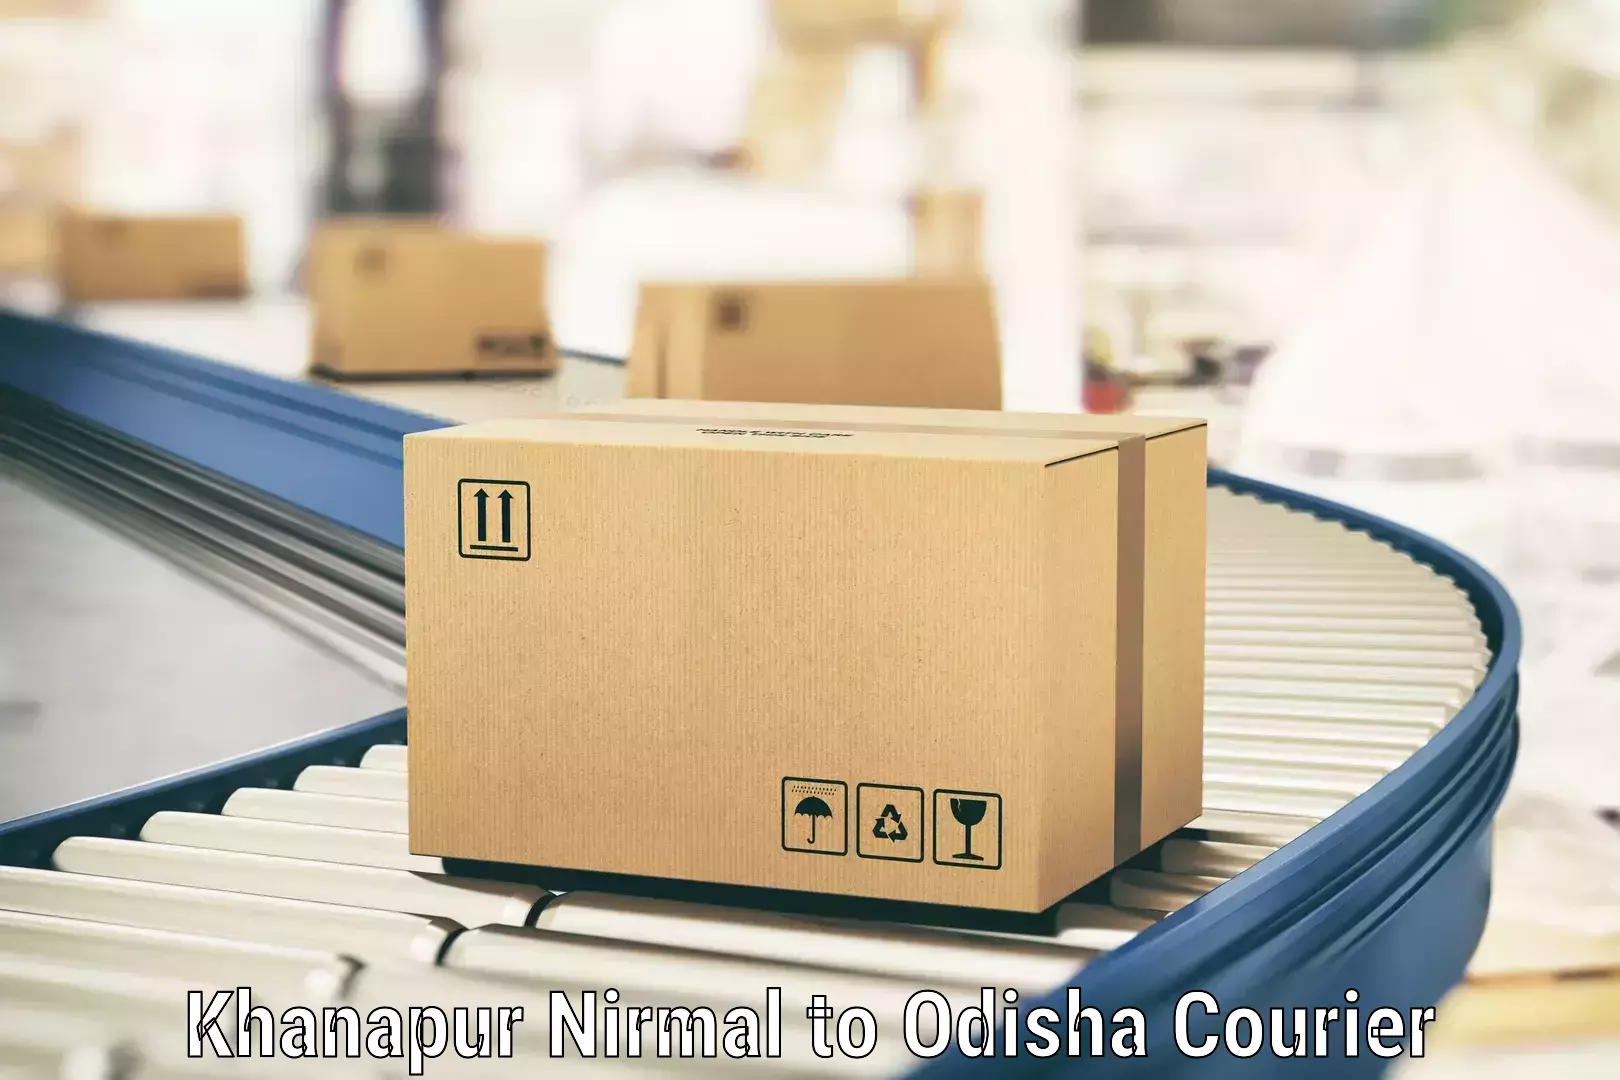 Large package courier Khanapur Nirmal to Muribahal